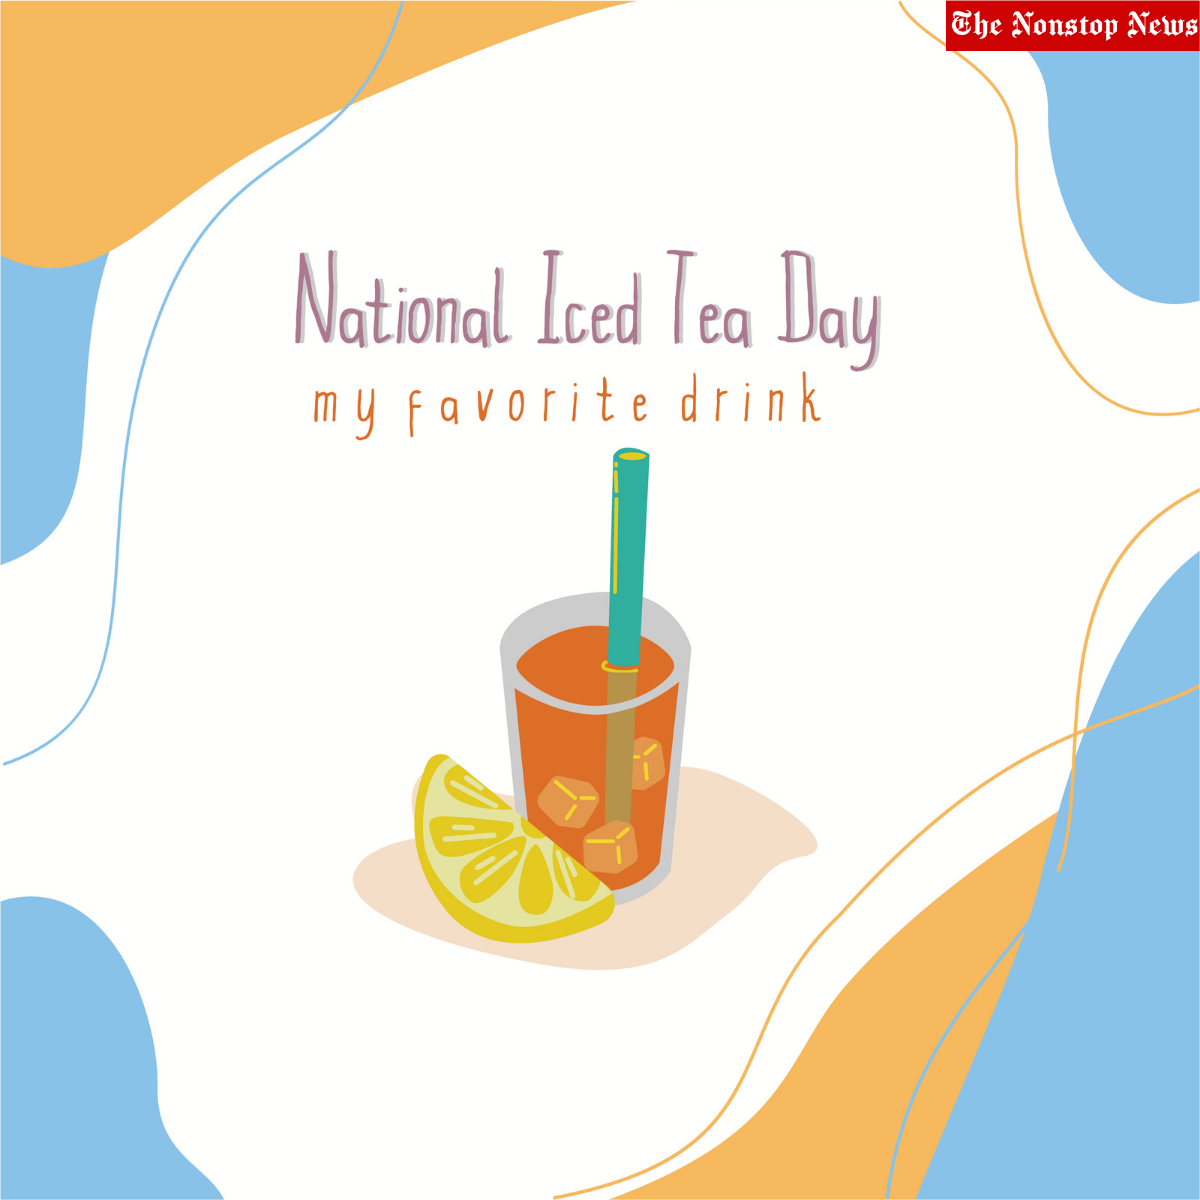 National Iced Tea Day In the United States 2022: Images, Posters, Quotes, Images, Greetings, Memes to Share